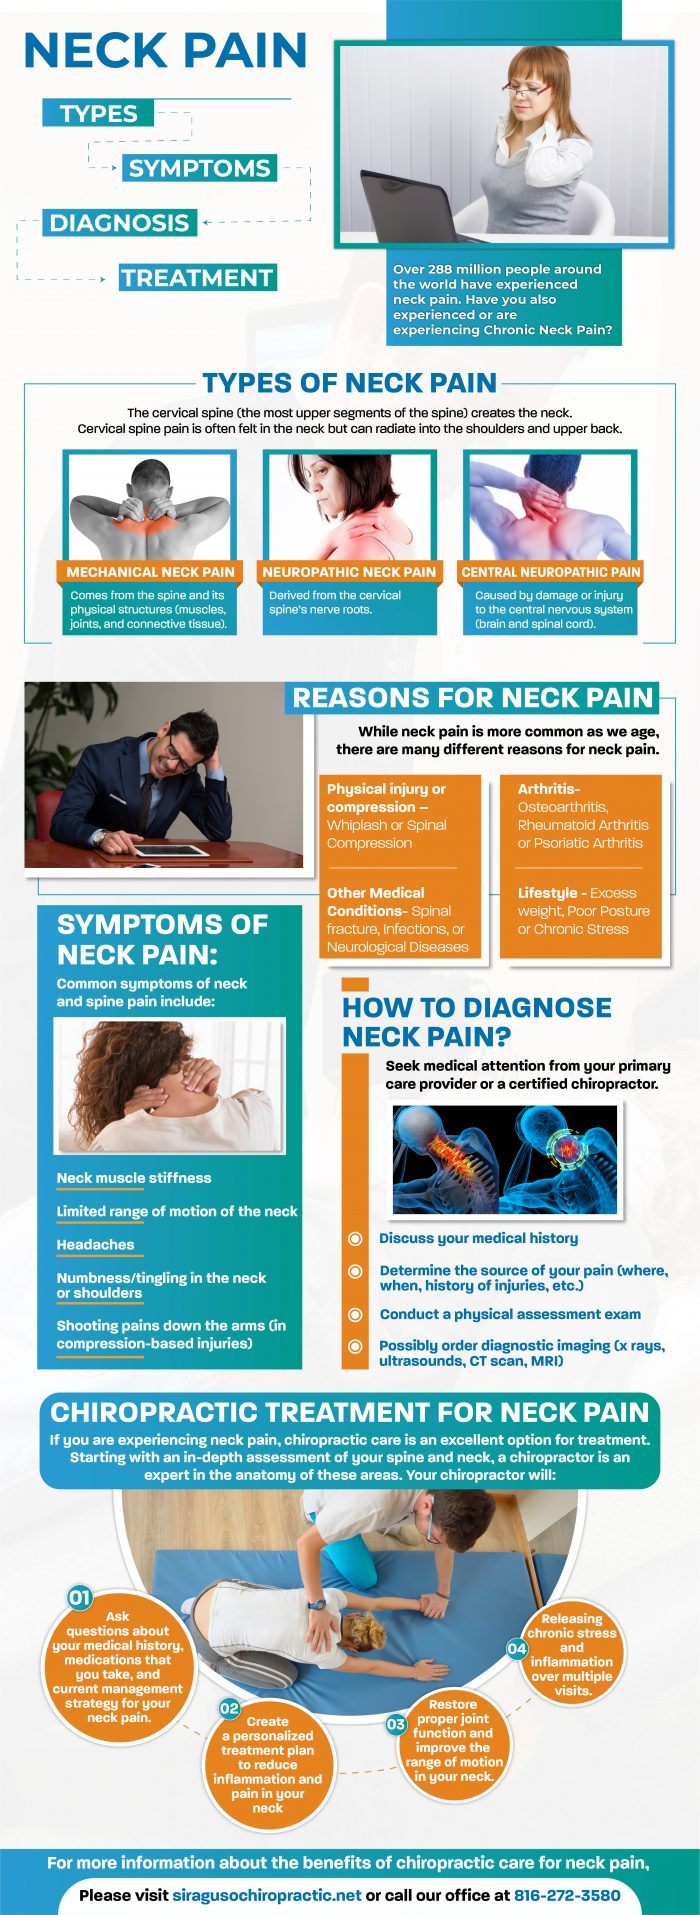 Neck Pain Causes, Types, Symptoms, Diagnosis, and Treatment